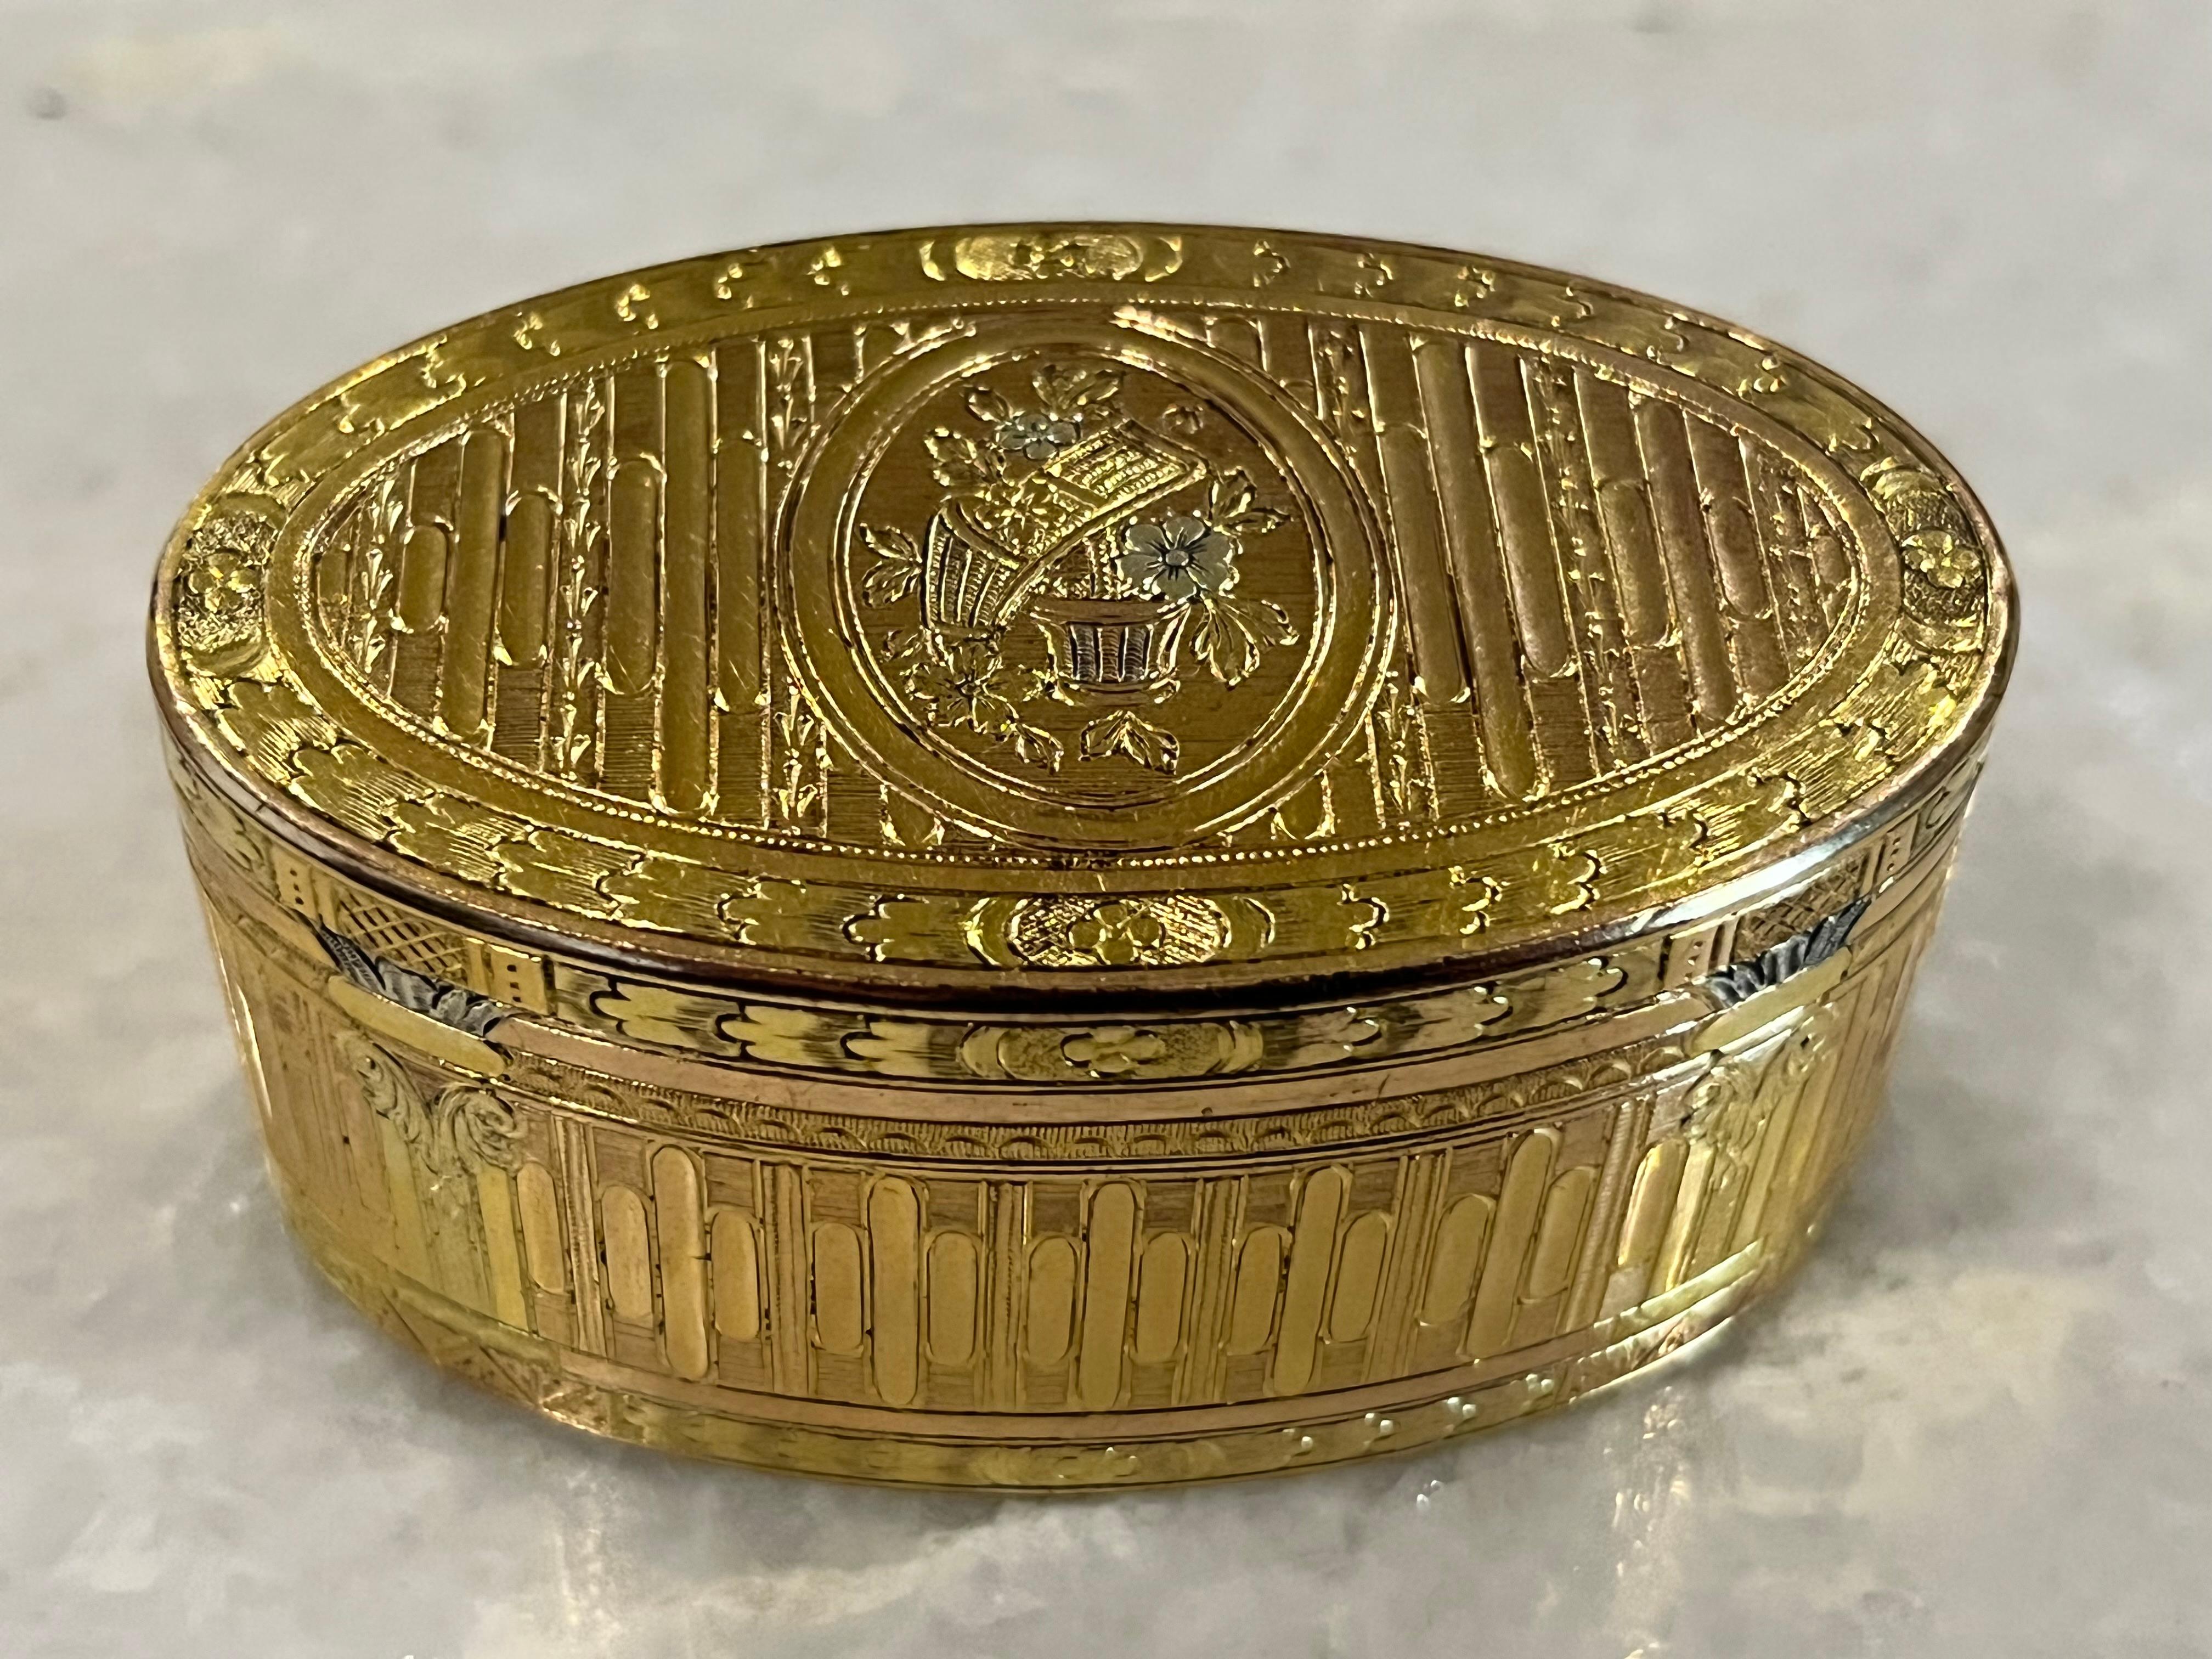 French Eighteenth-Century Silver-Gilt Snuff Box, of Outstanding Quality